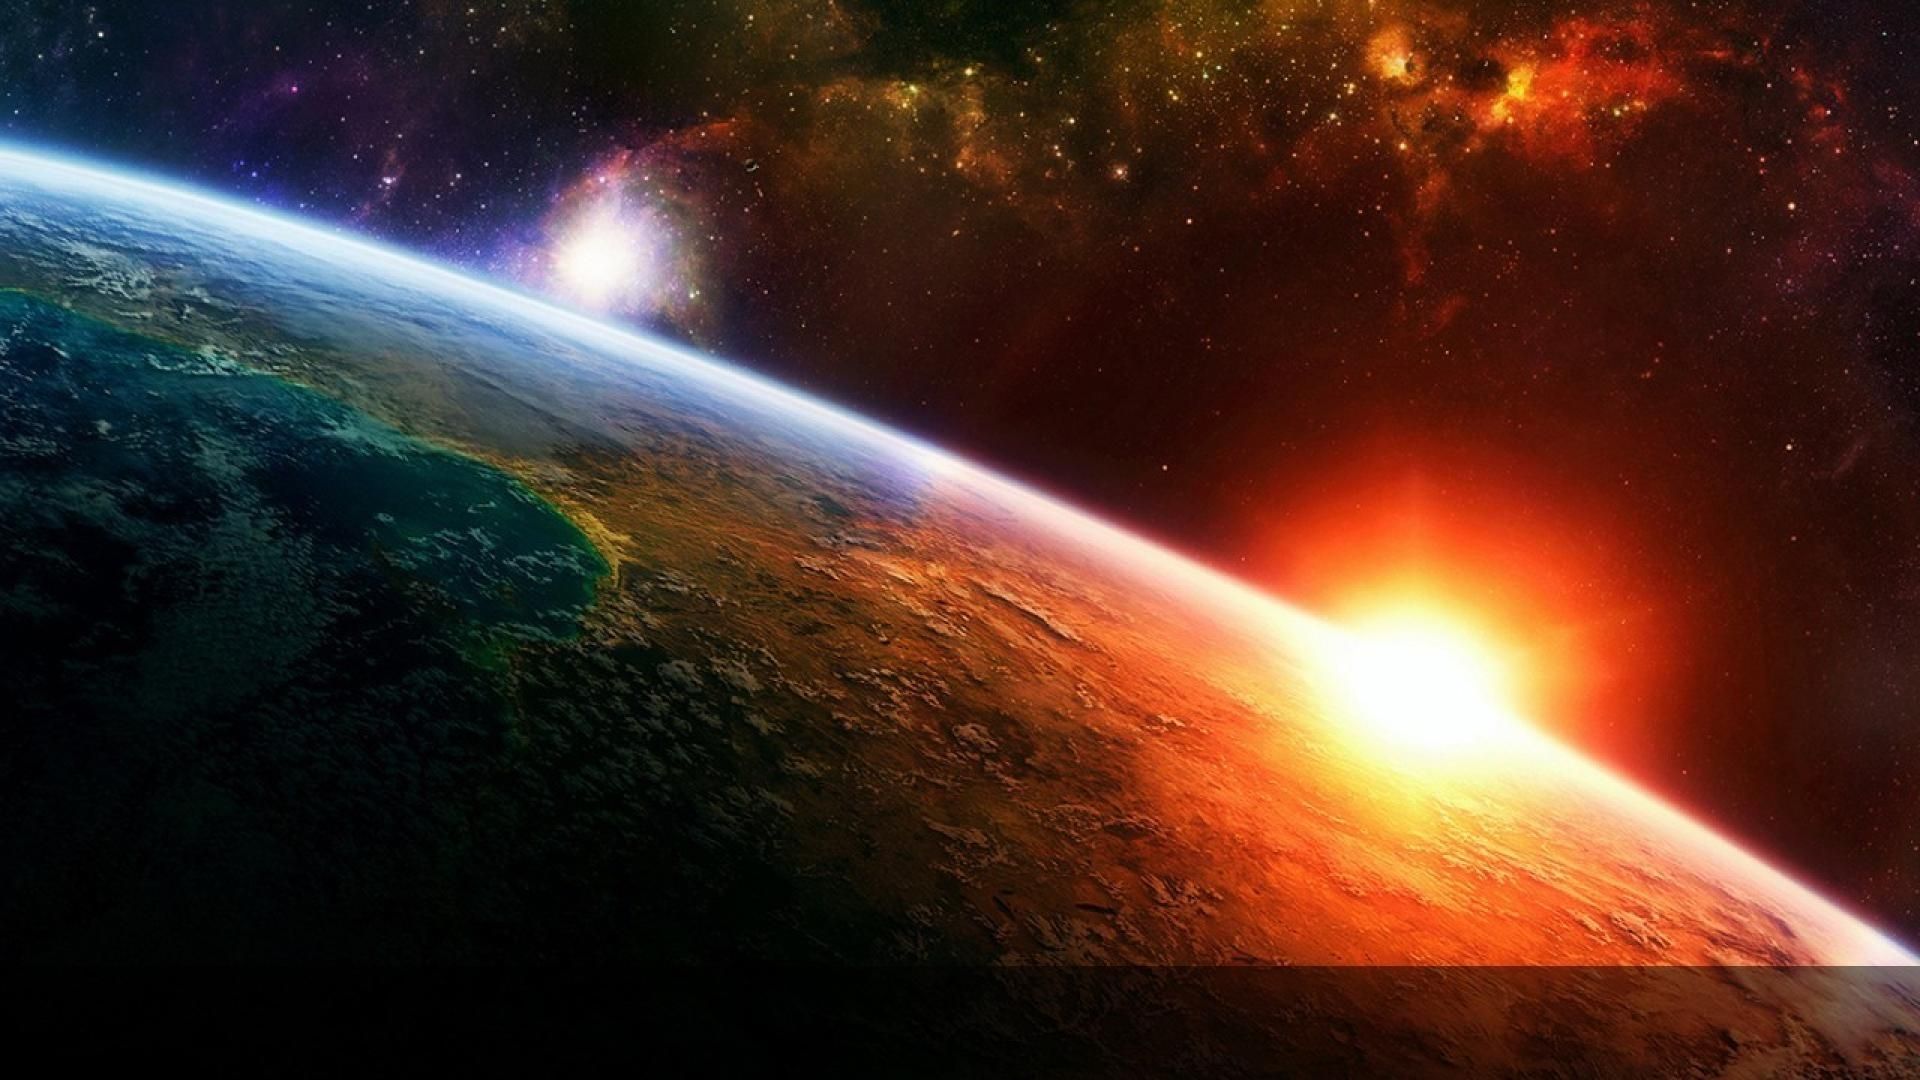 Cool Wallpapers 1920x1080 with Earth on Space HD Wallpapers for Free